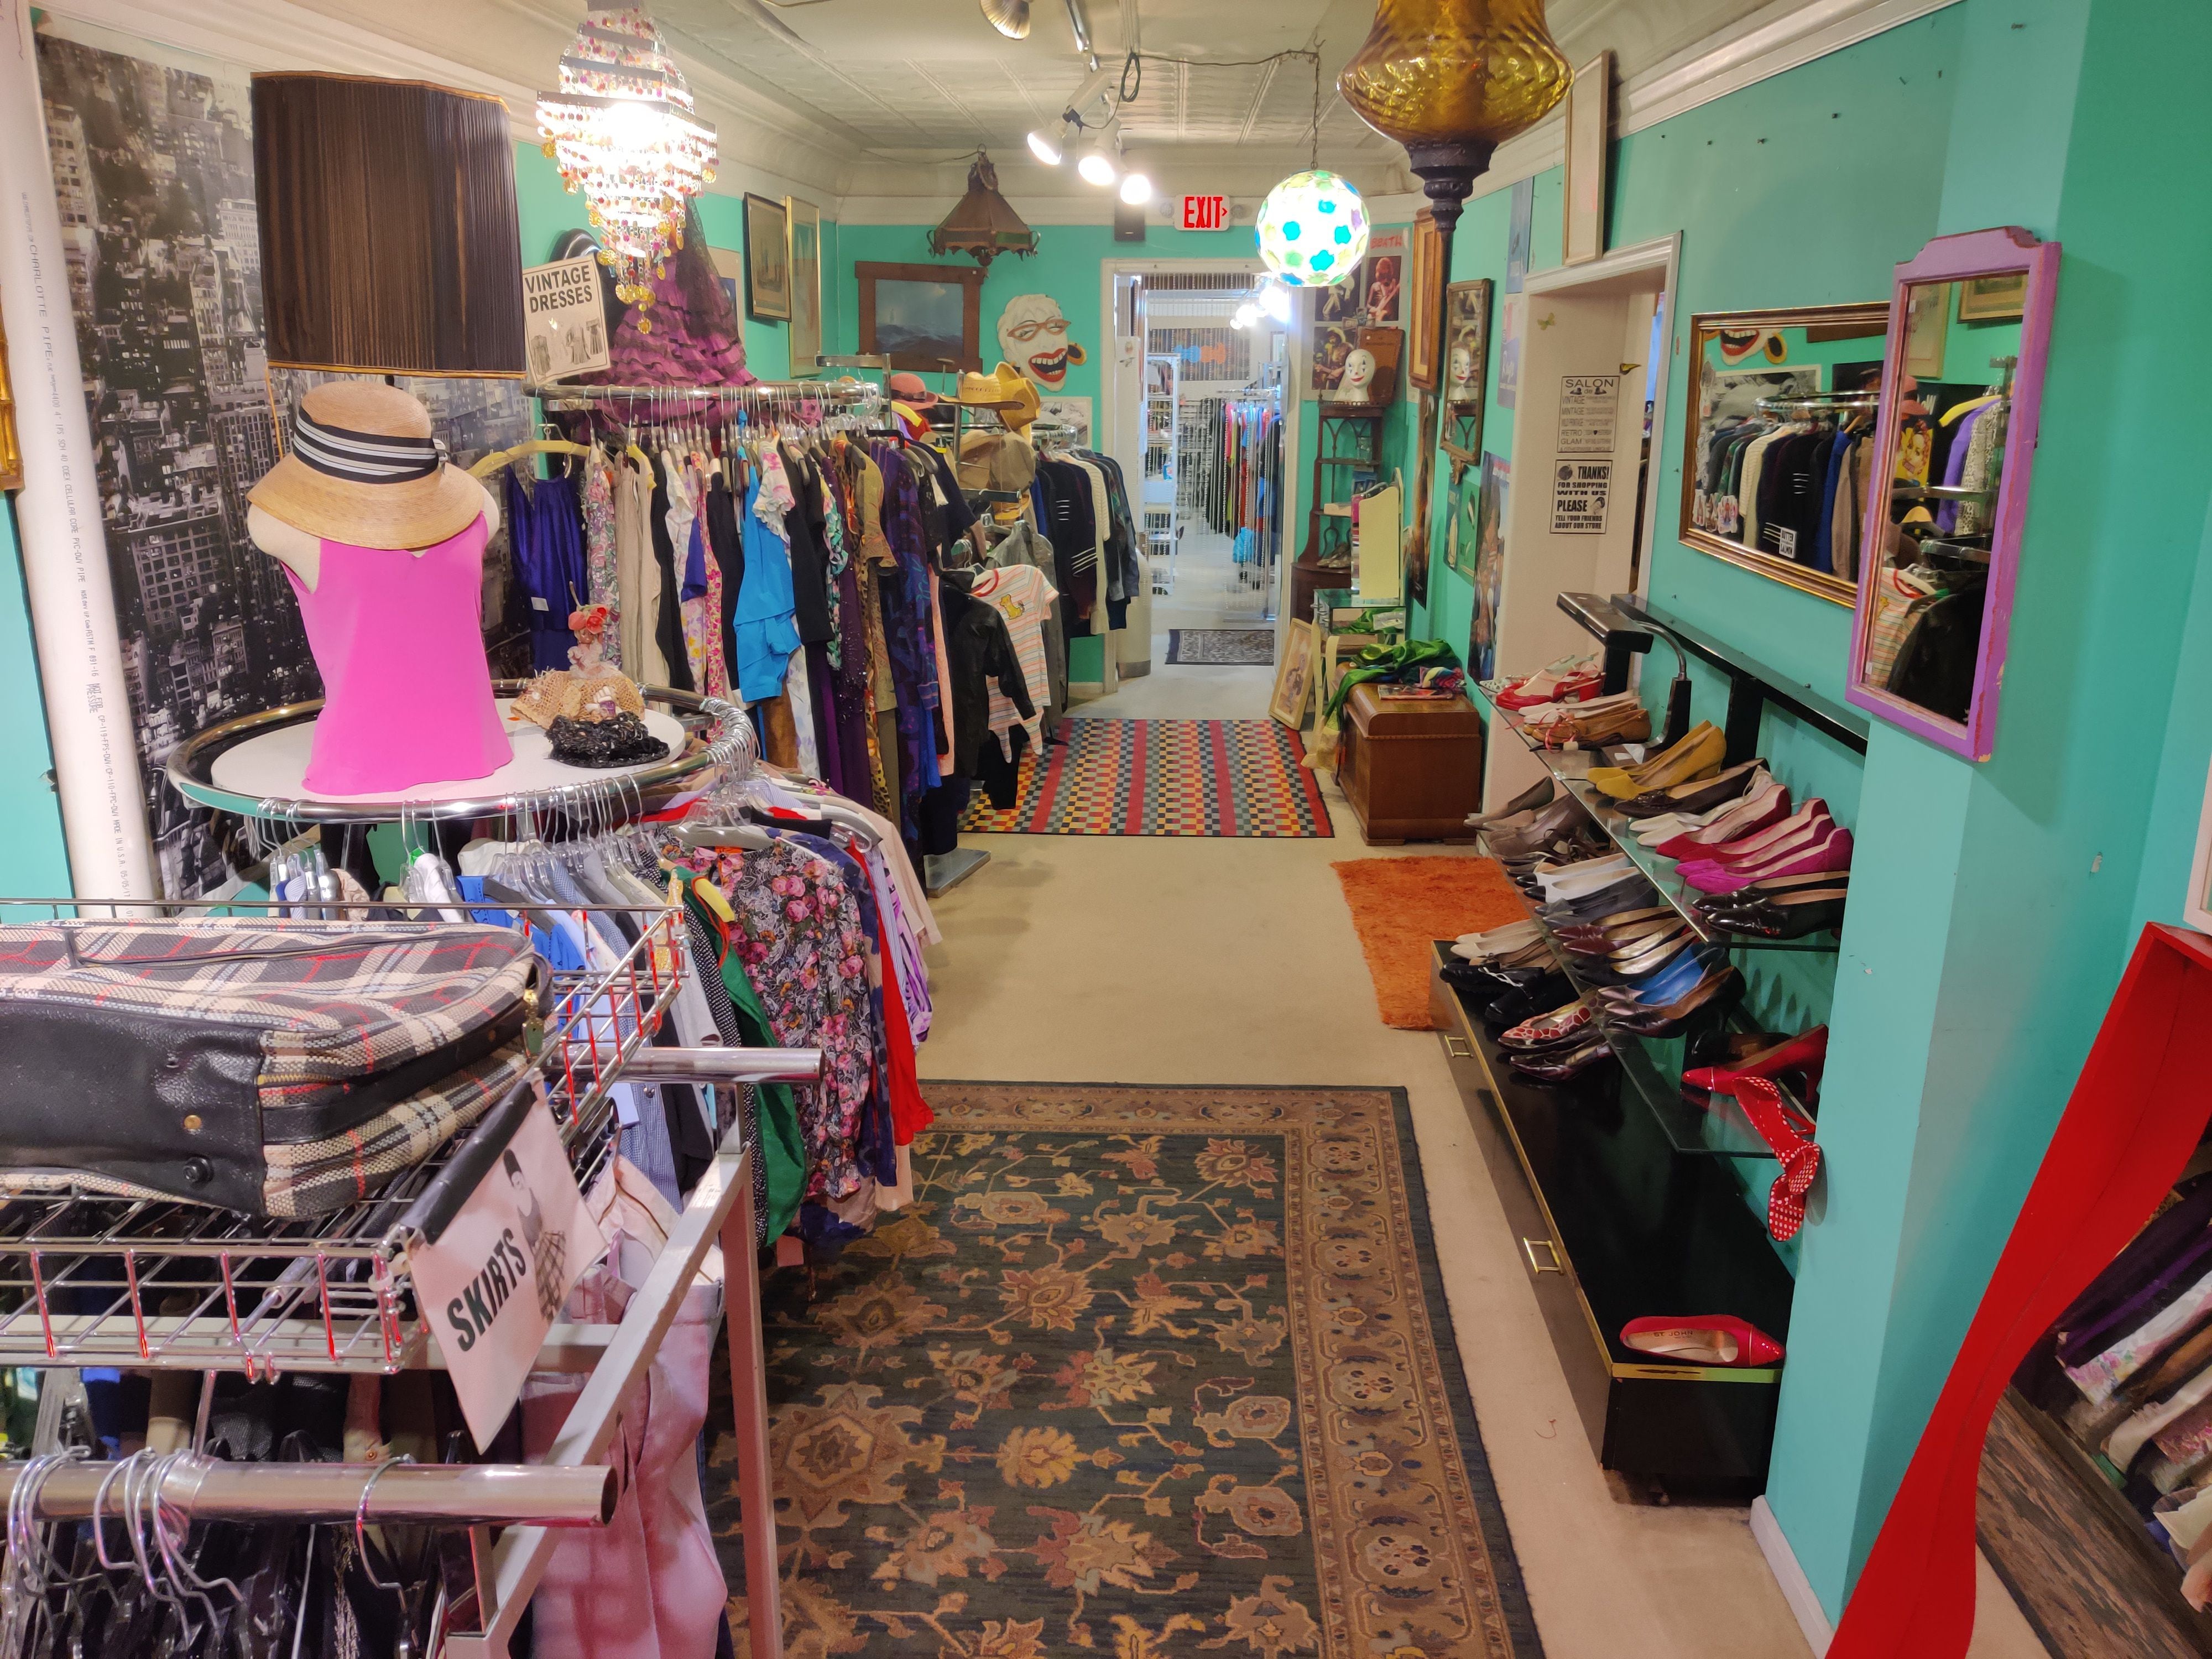 Financial slump was a boon for Phoenix-based consignment shop